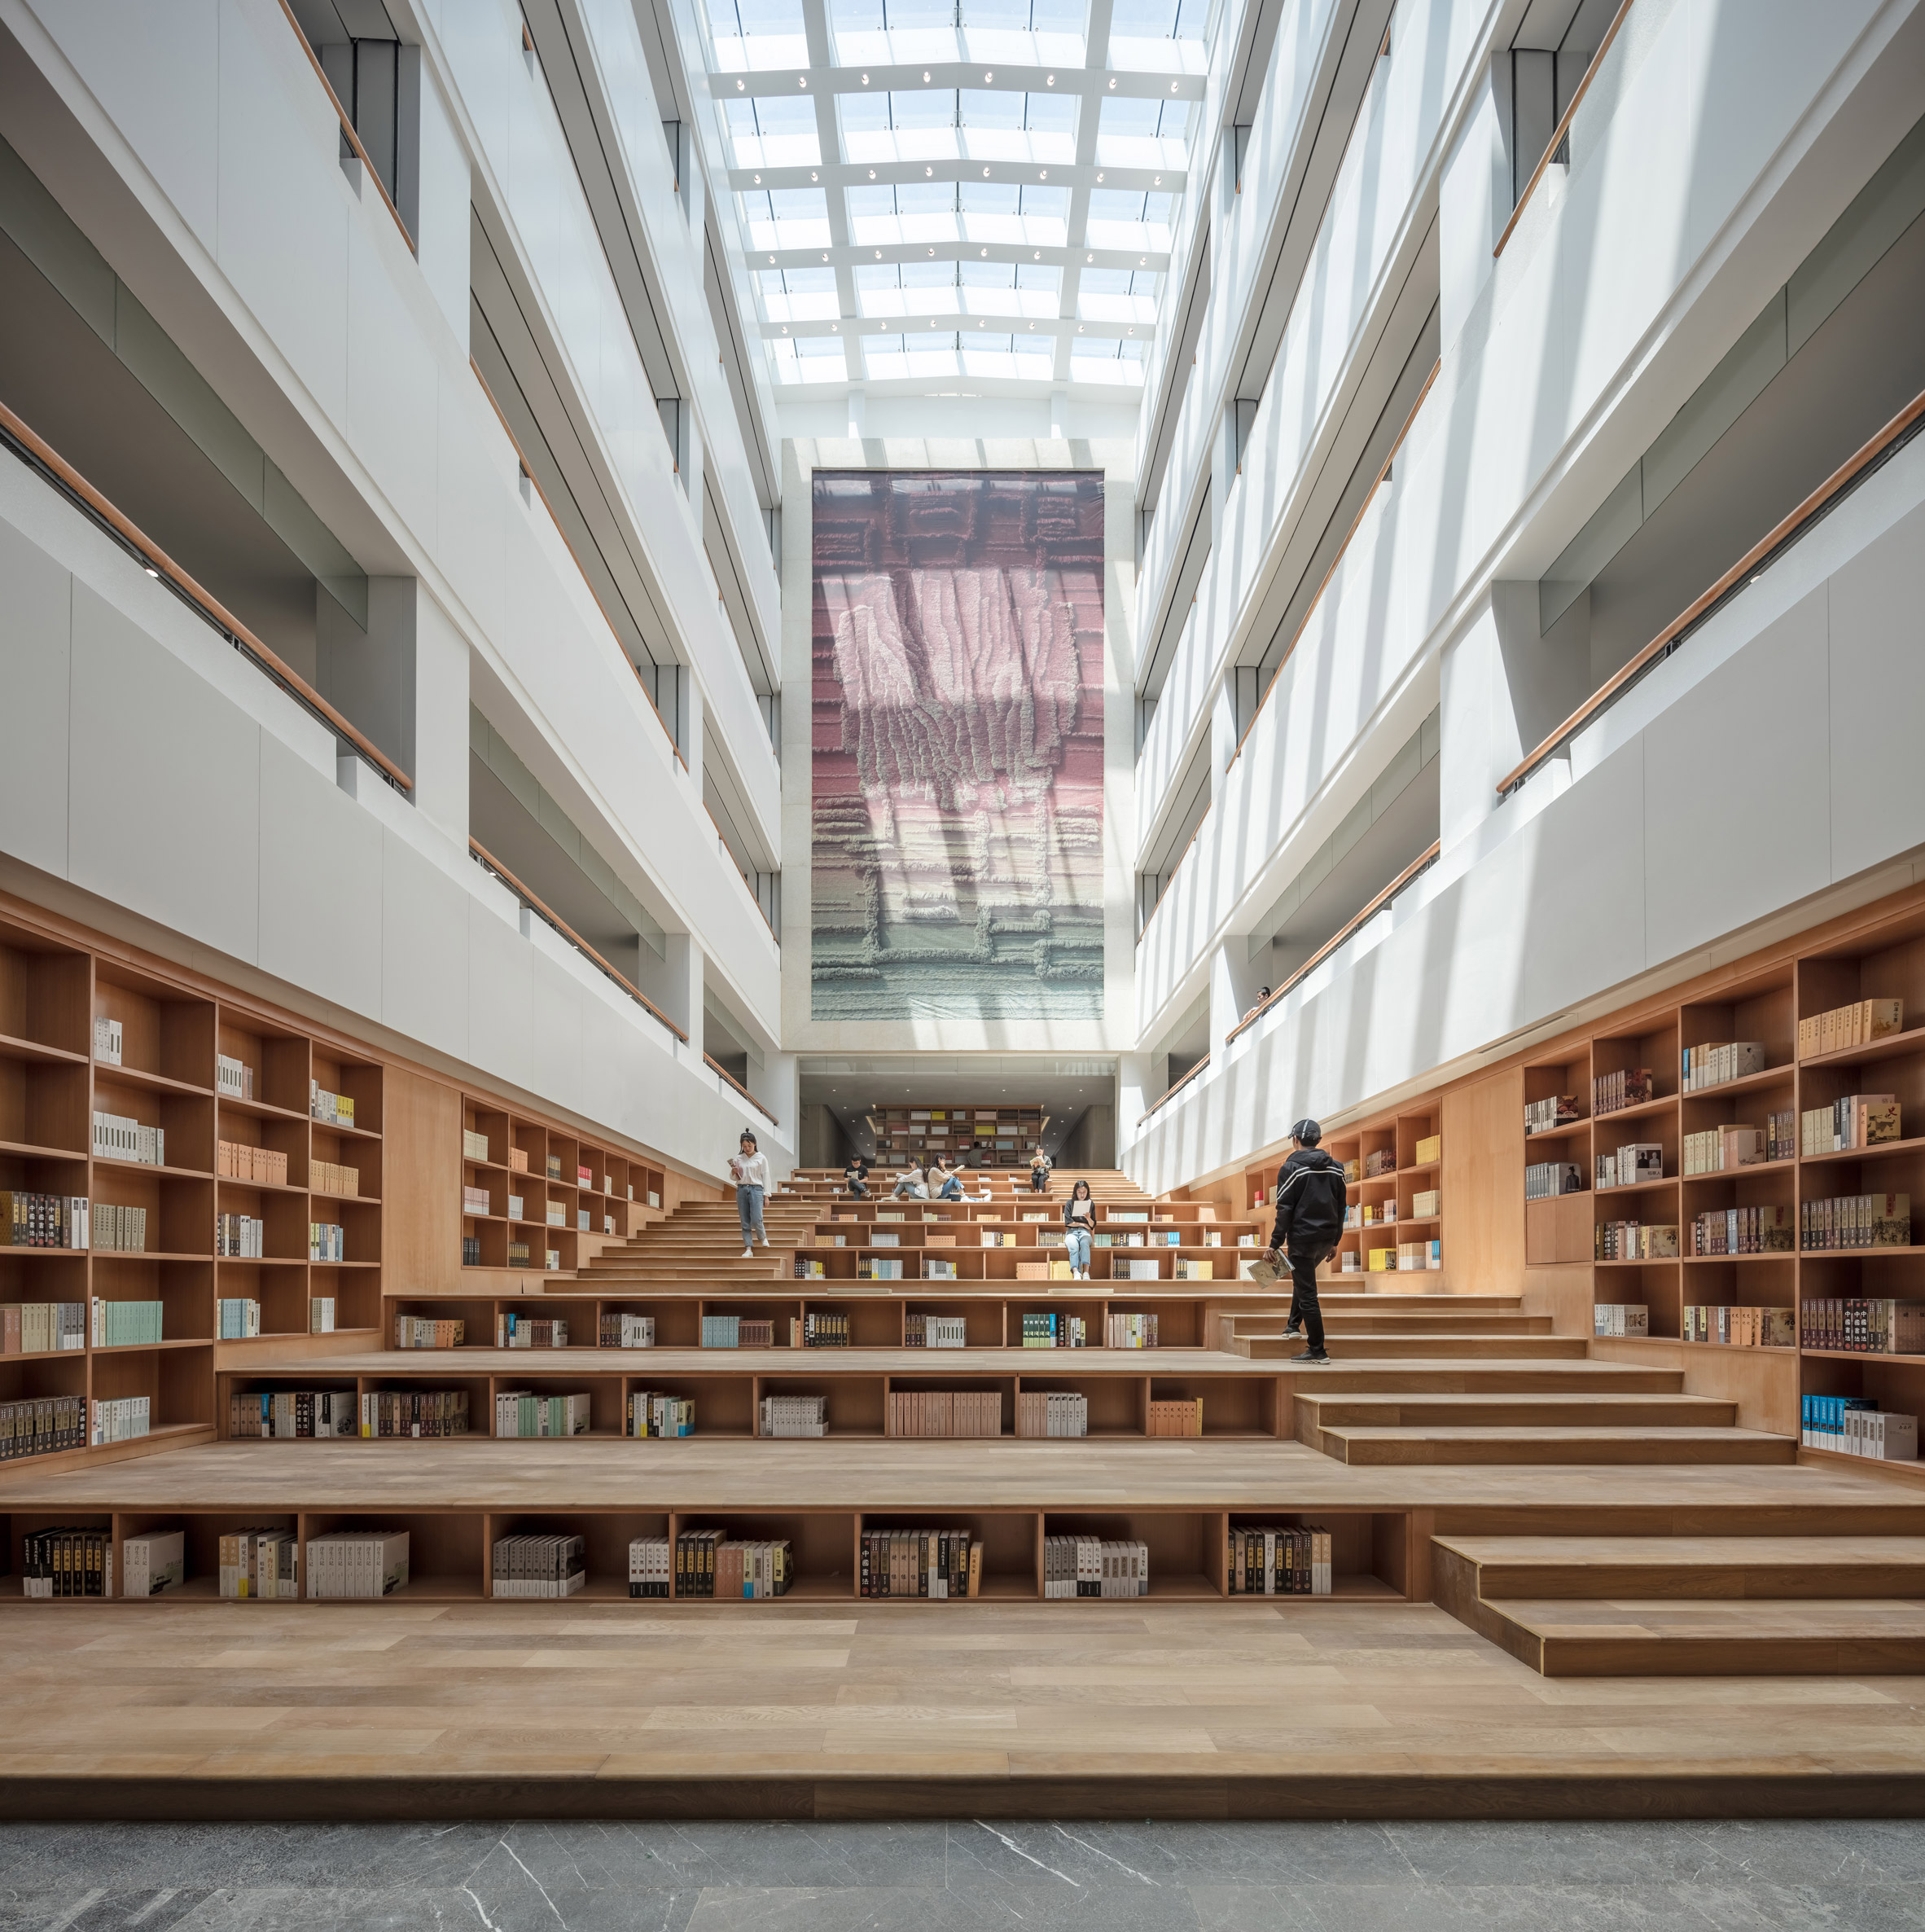 Yan'an University campus building by Architectural Design and Research Institute of Tsinghua University, China